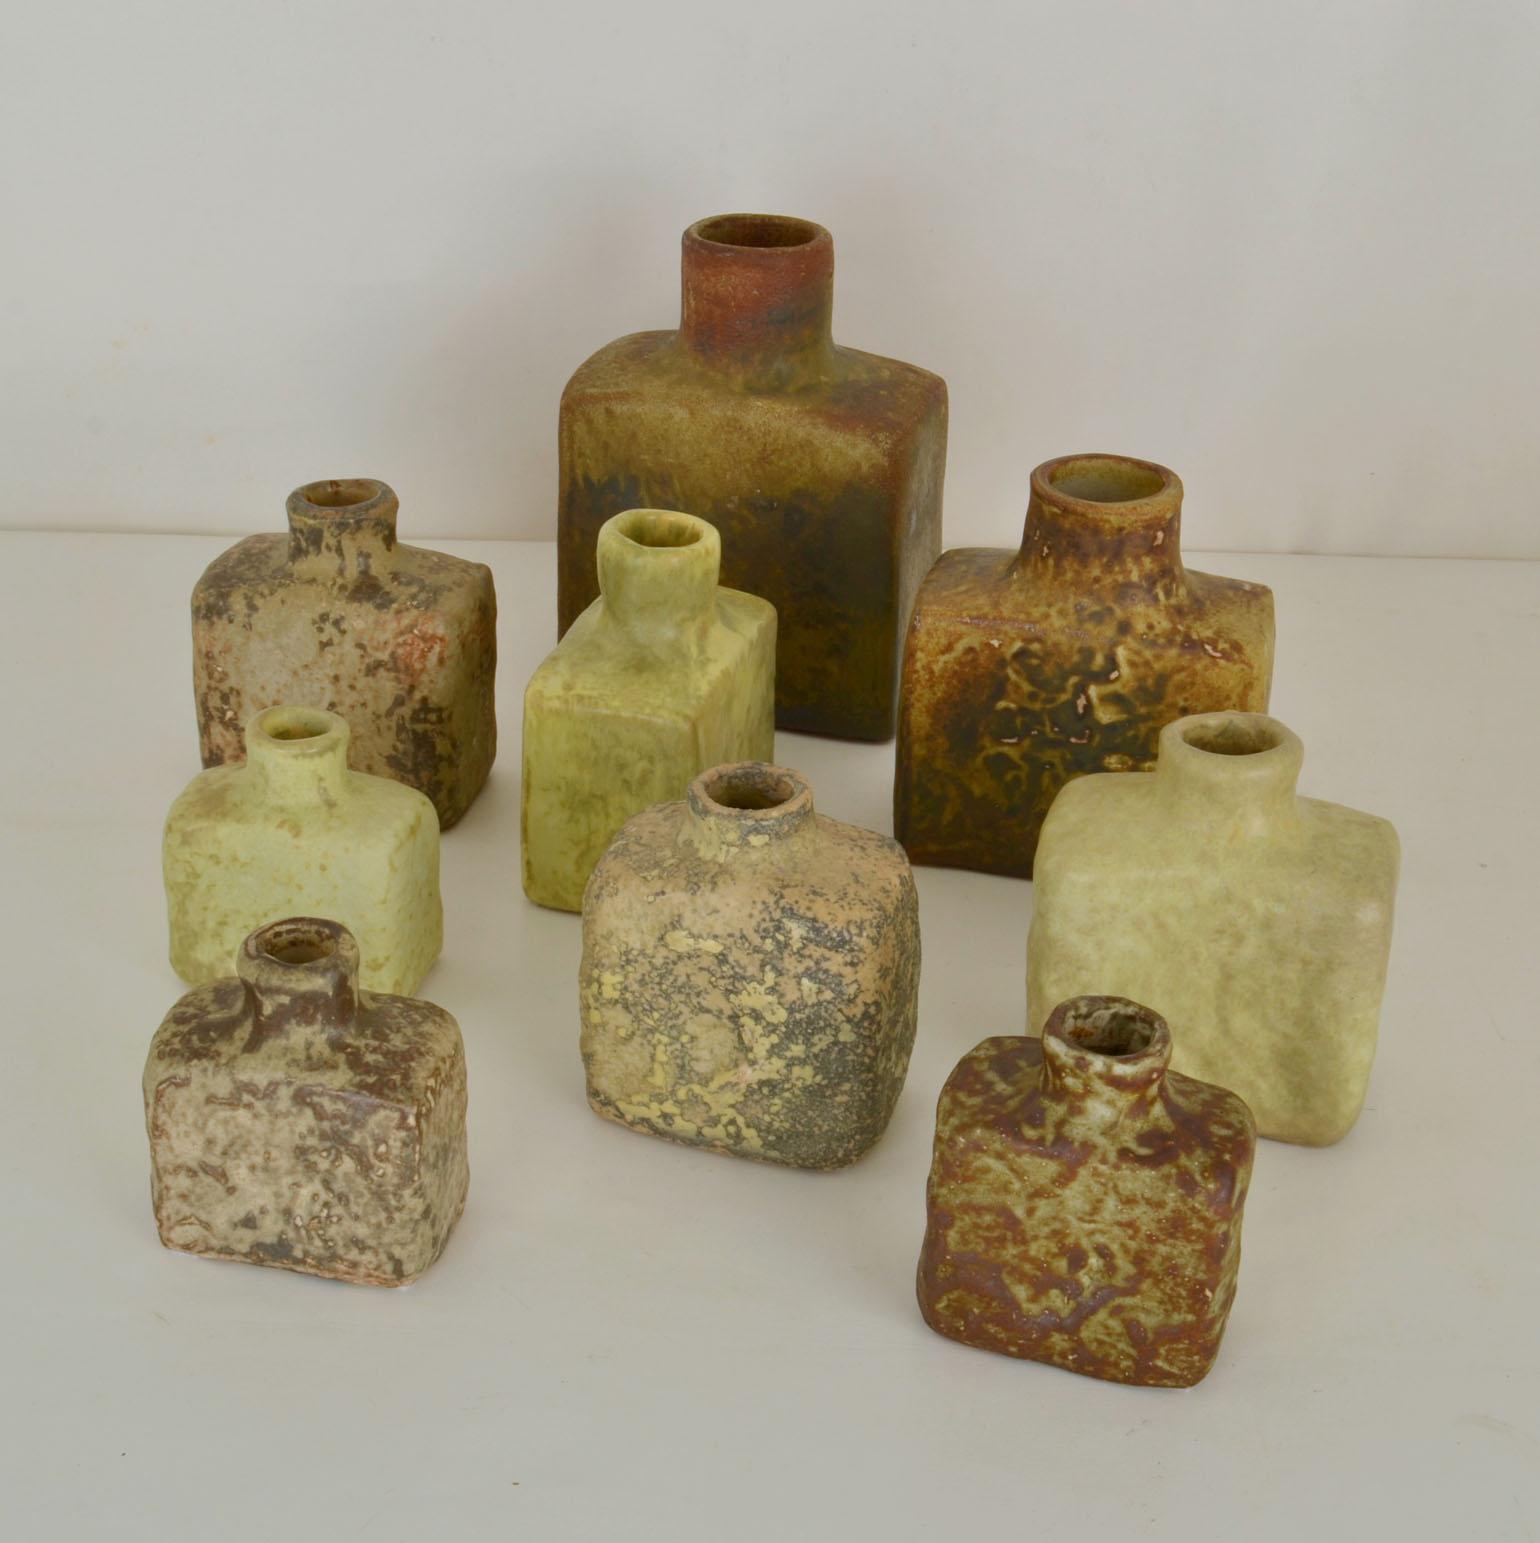 Mid-Century Modern square studio pottery vases glazed in grey-green natural tones hand formed and in various heights by Mobach's Dutch ceramist in the 1960's. The glazes made of natural resources are highly influenced by leading English Potter